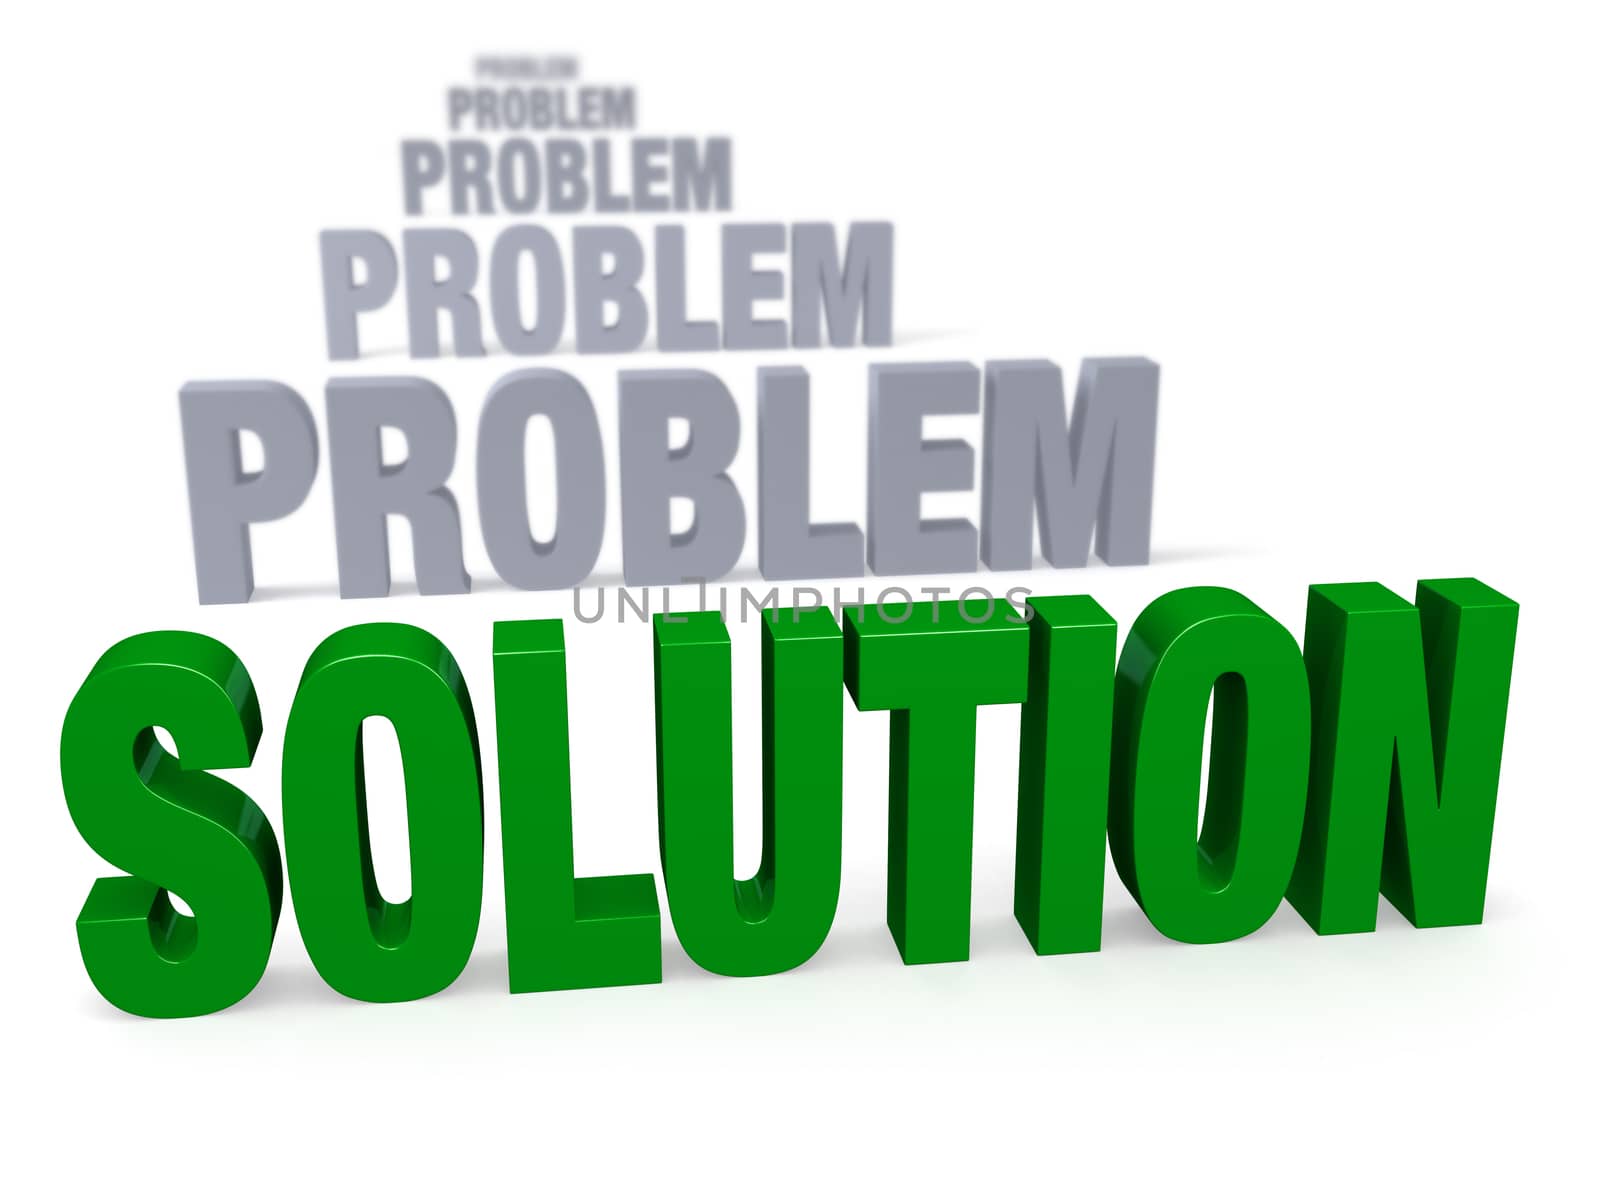 Focus On Solution, Not Problems by Em3